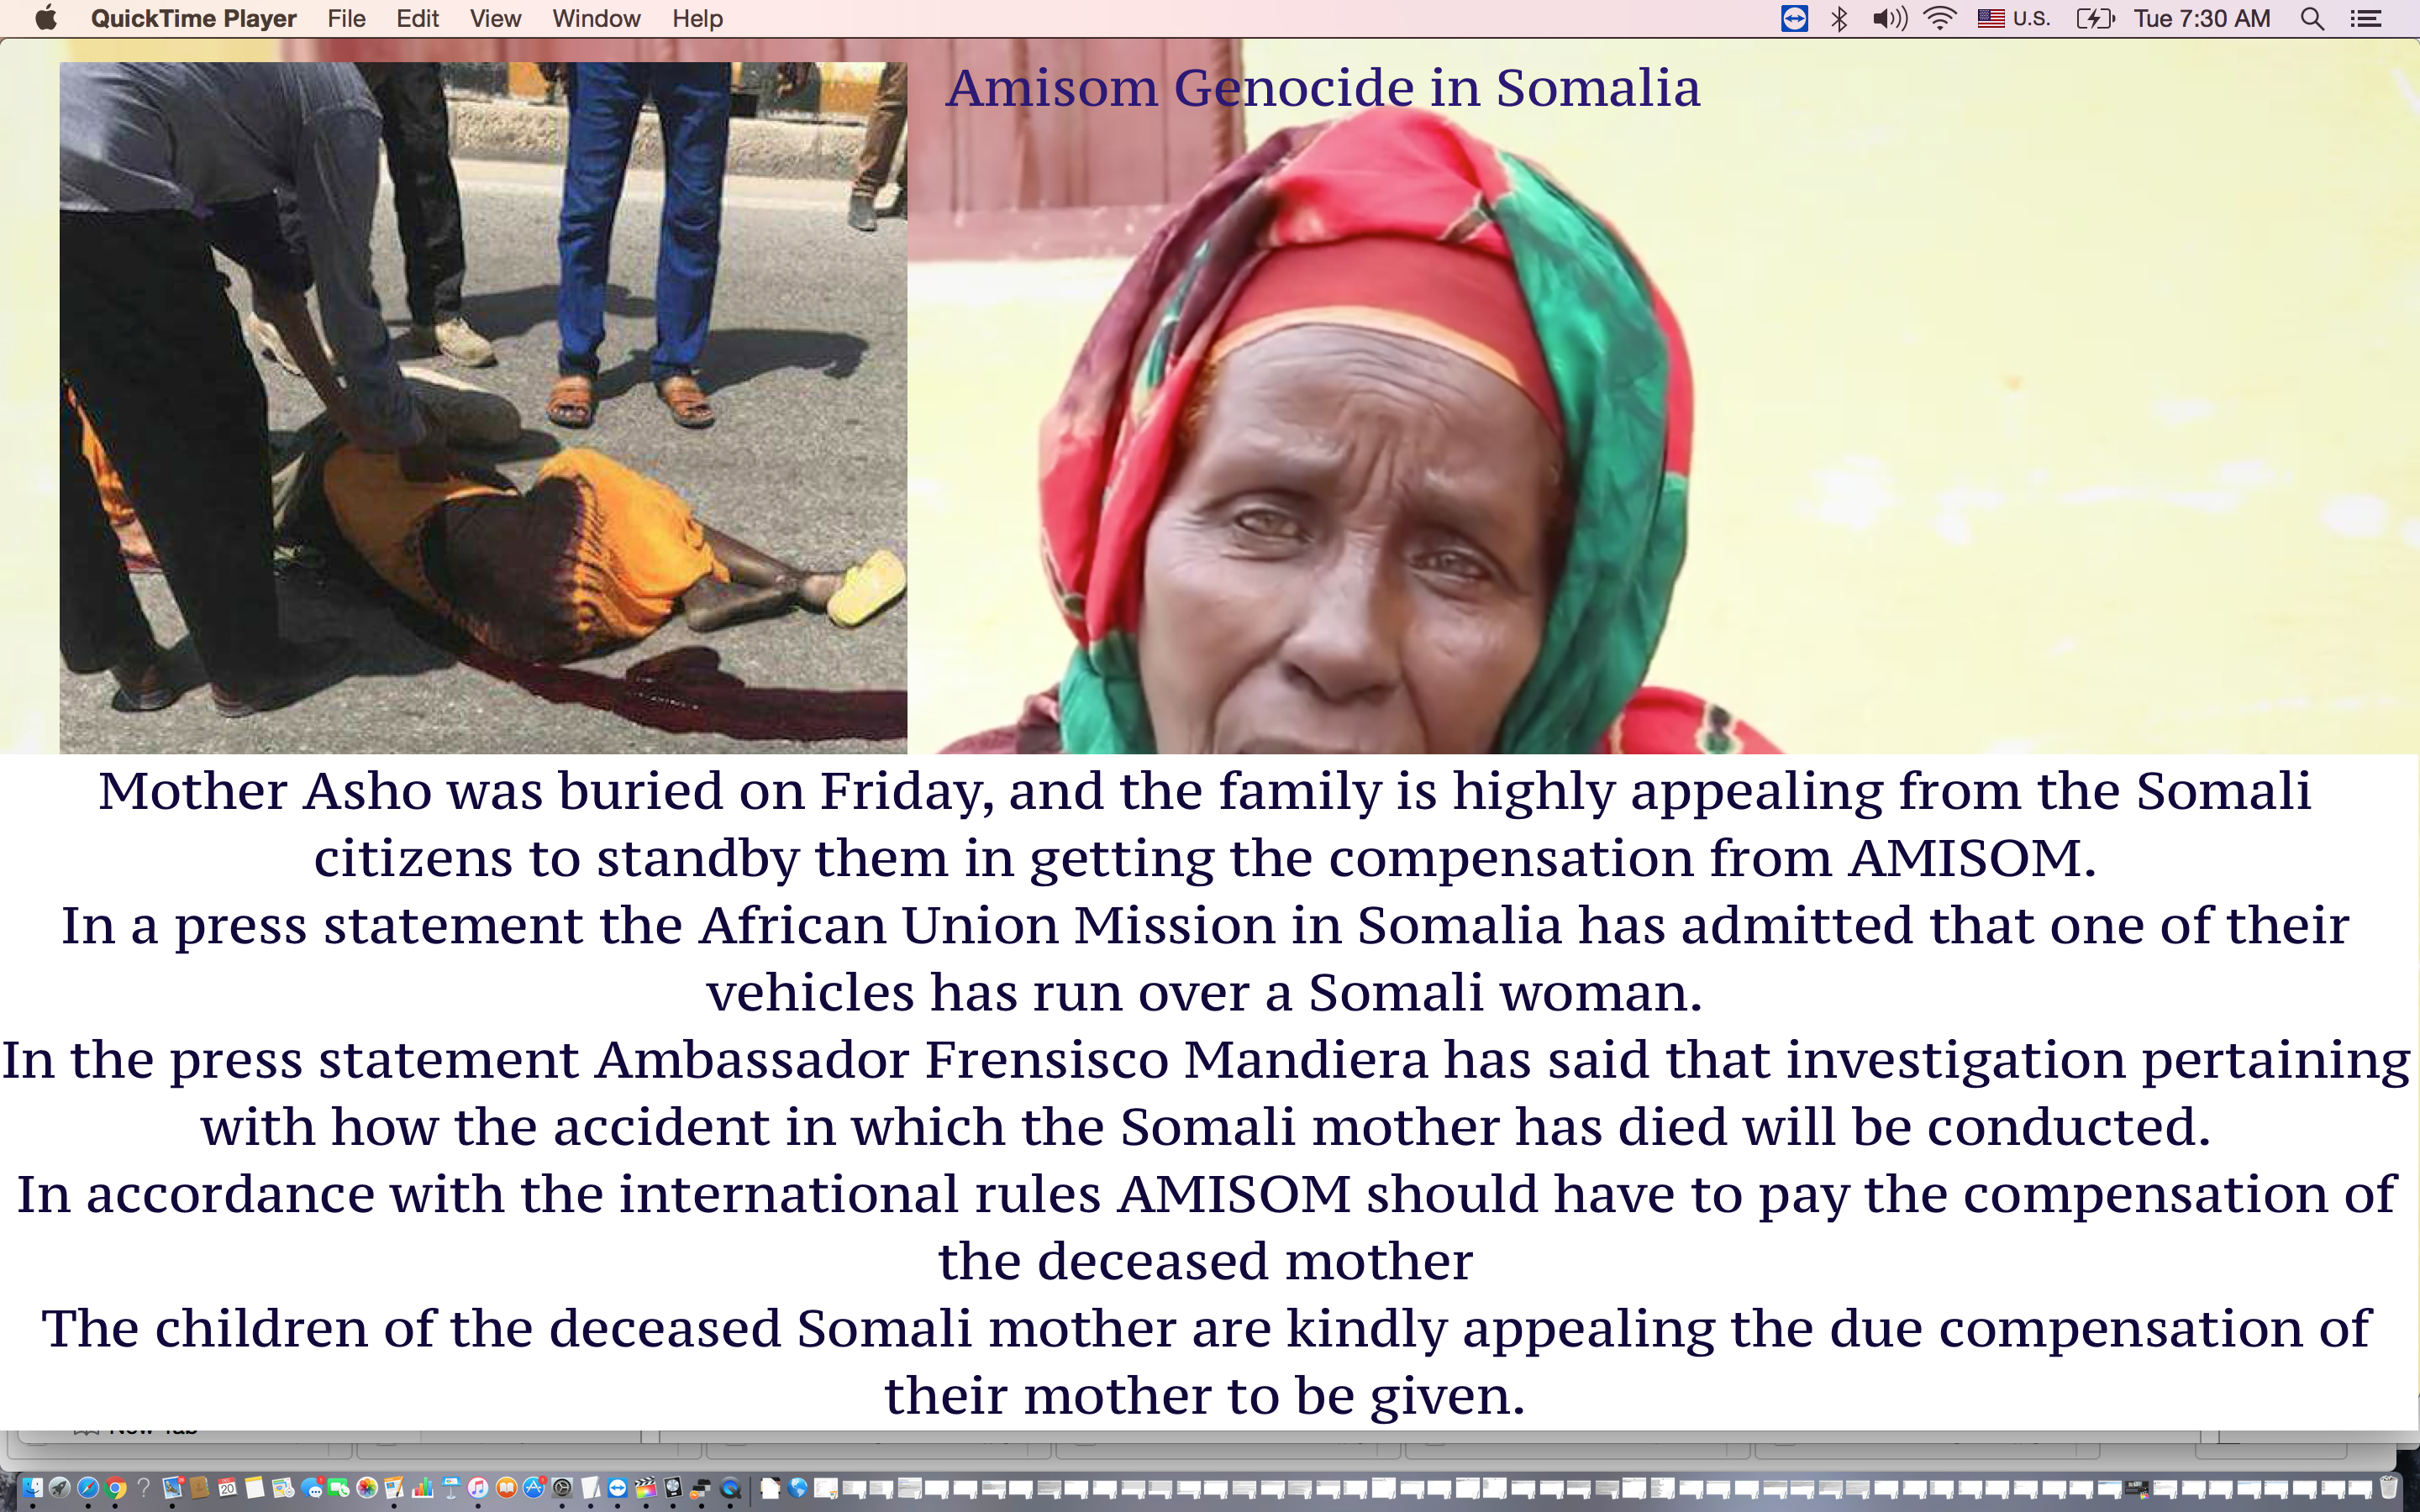 Amisom Genocide in Somalia "family of deceased mother"